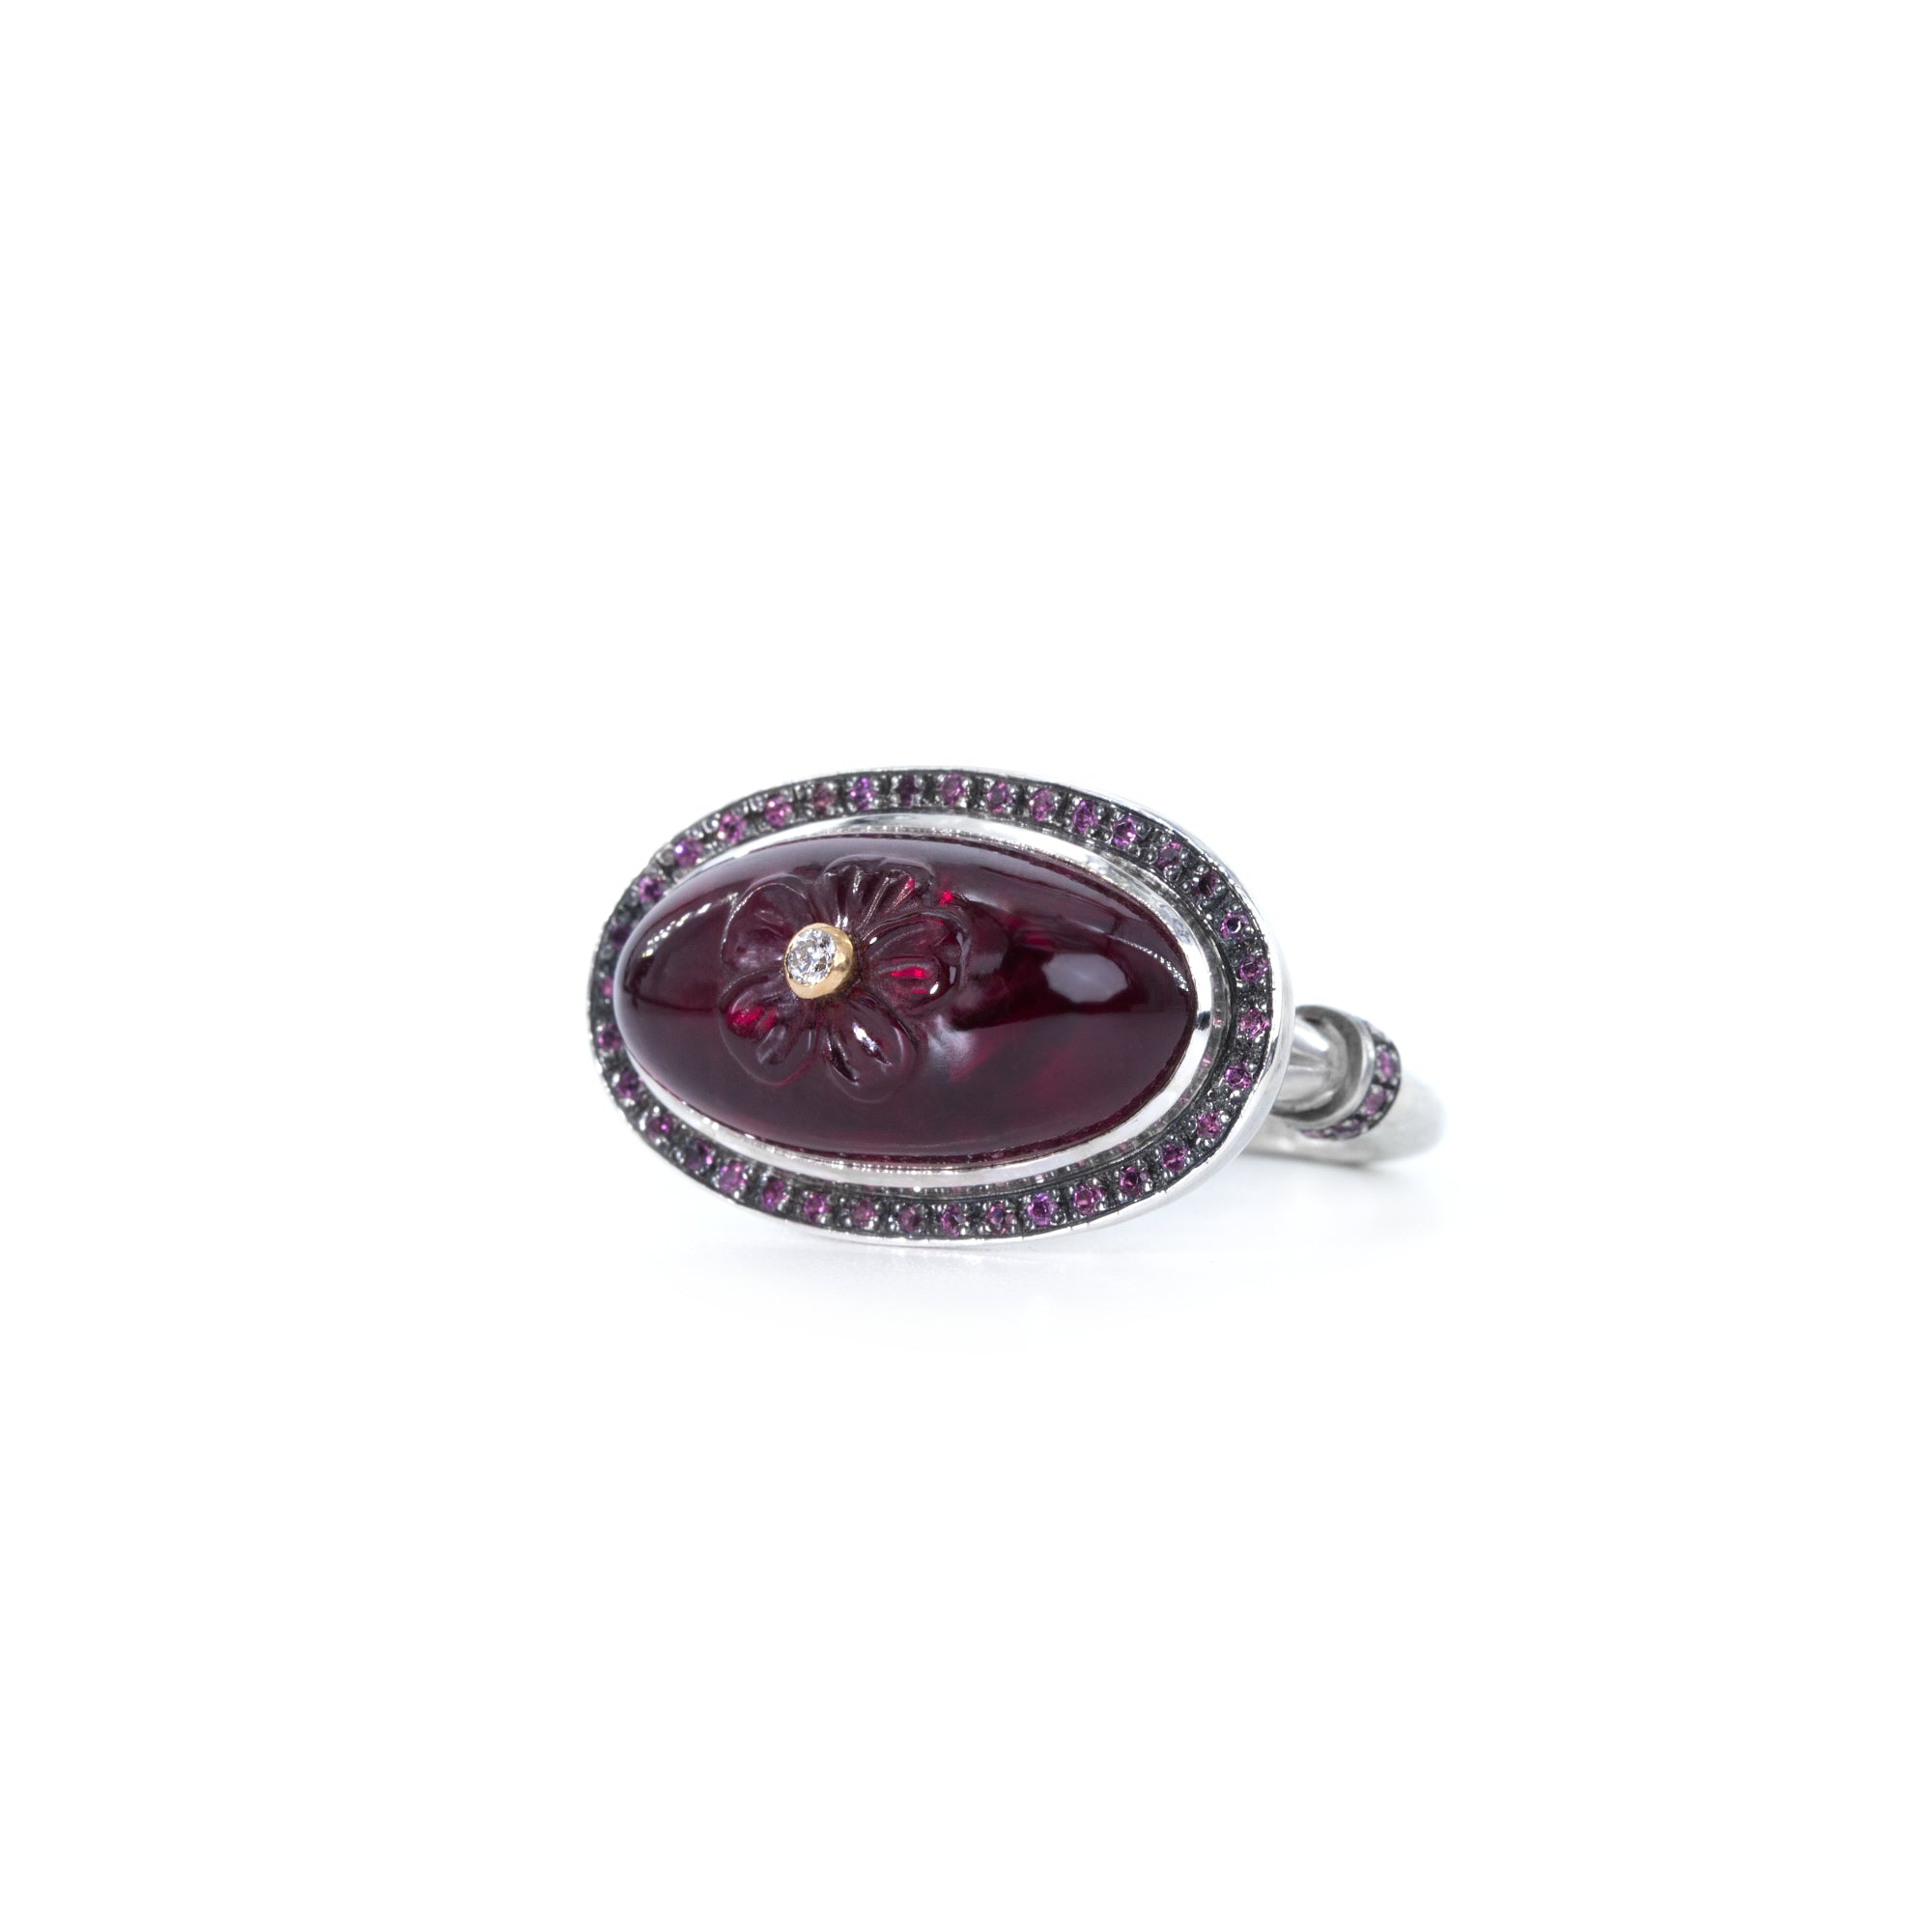 Sterling silver ring with oval rhodolite cabochon. The gemstone is hand carved with flower and adorned with white diamond set in 18K gold. The ring's crown is finished with halo of rhodolites